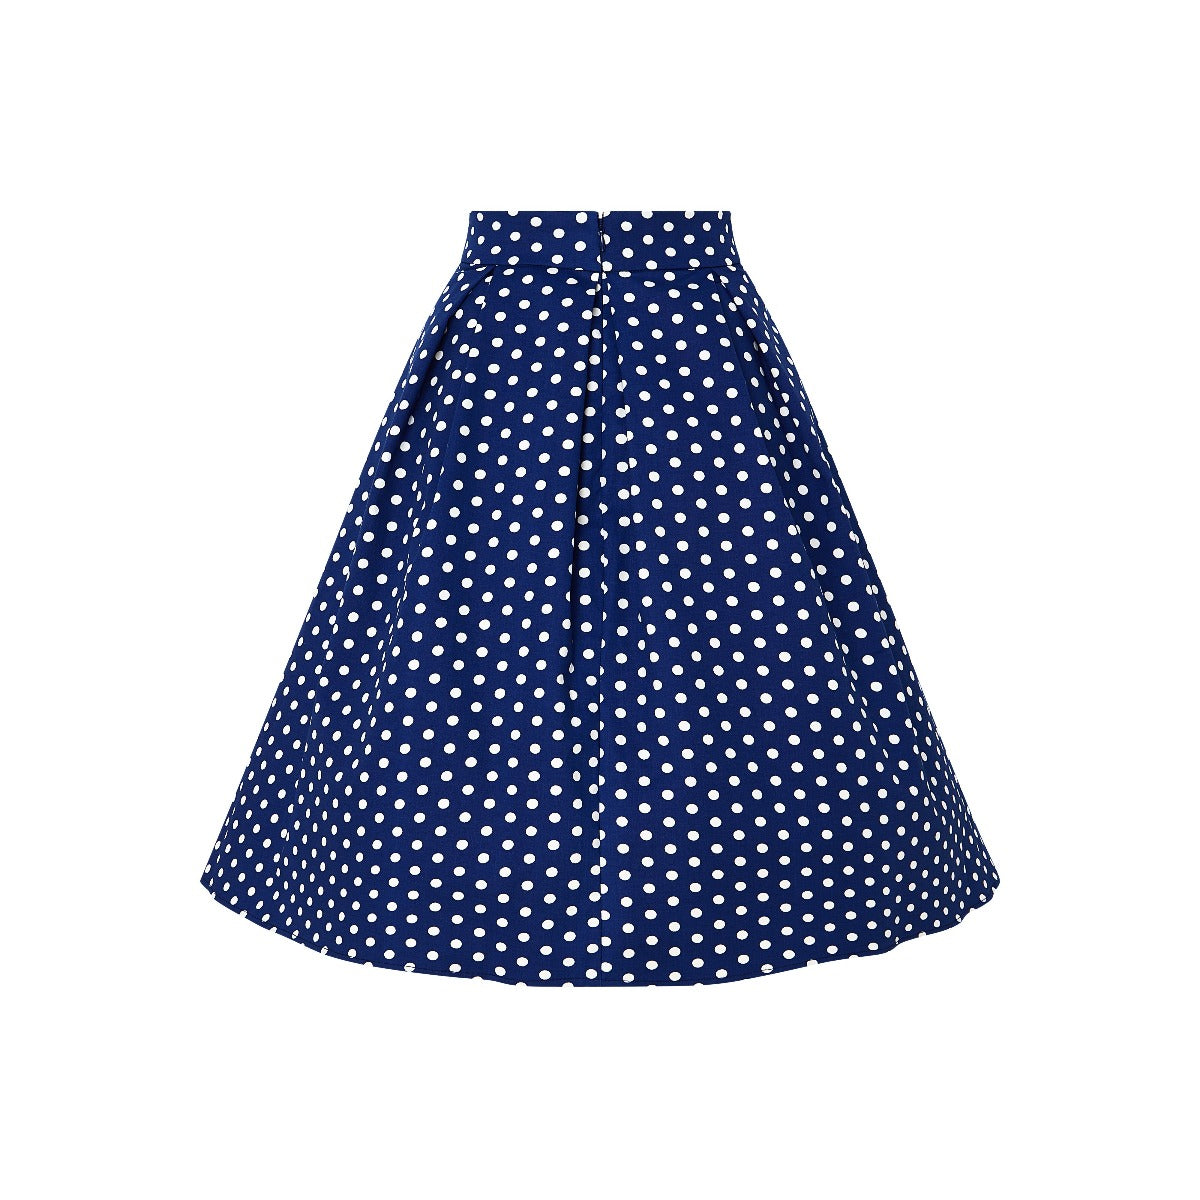 Our black top and dark blue polka dot flared skirt, back view